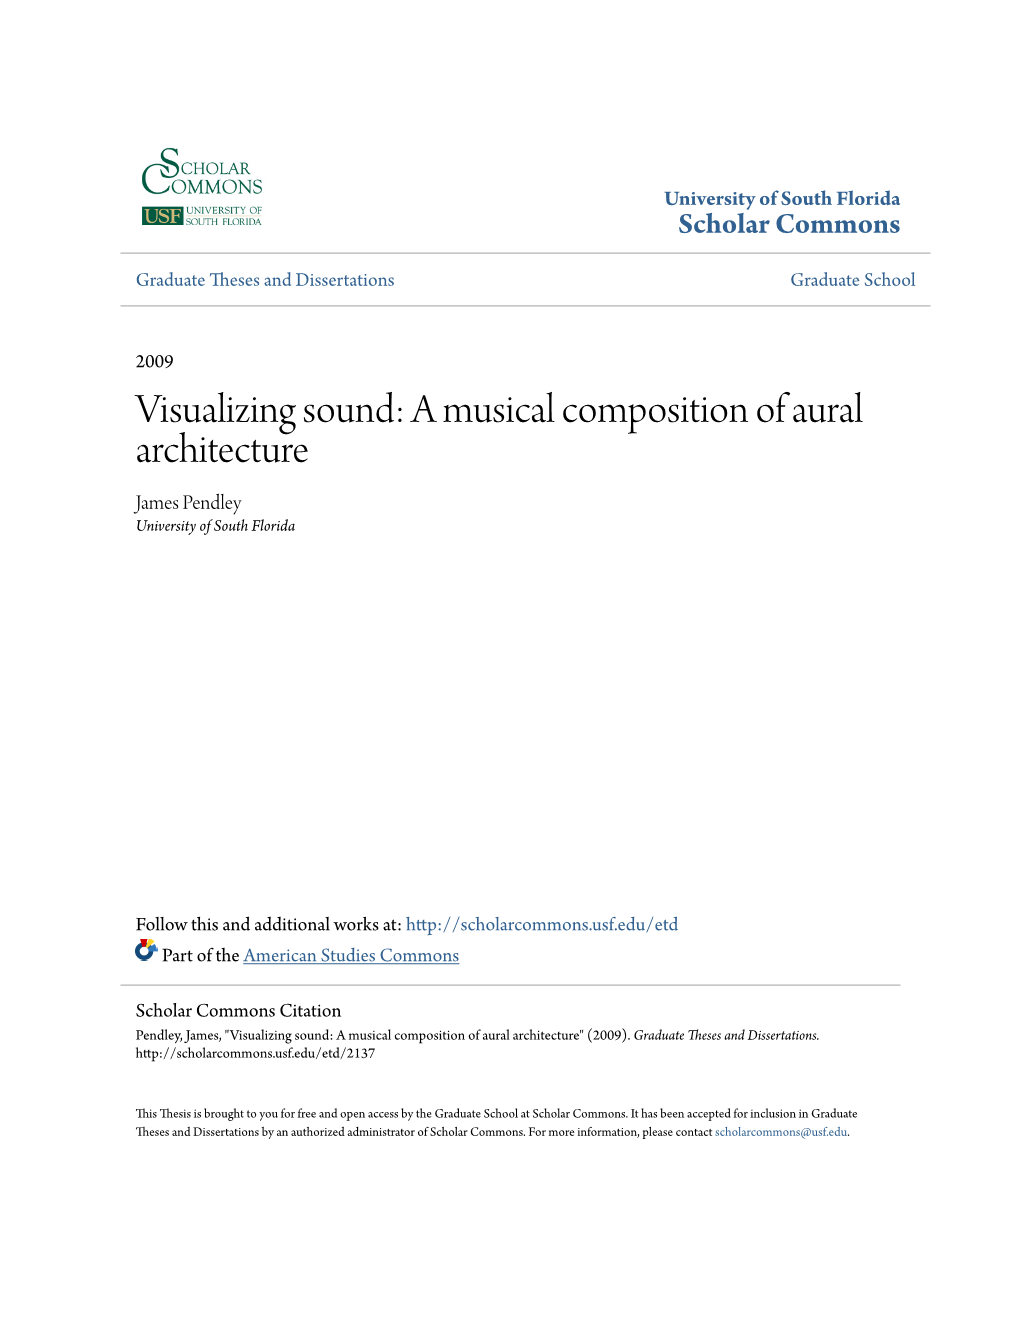 A Musical Composition of Aural Architecture James Pendley University of South Florida